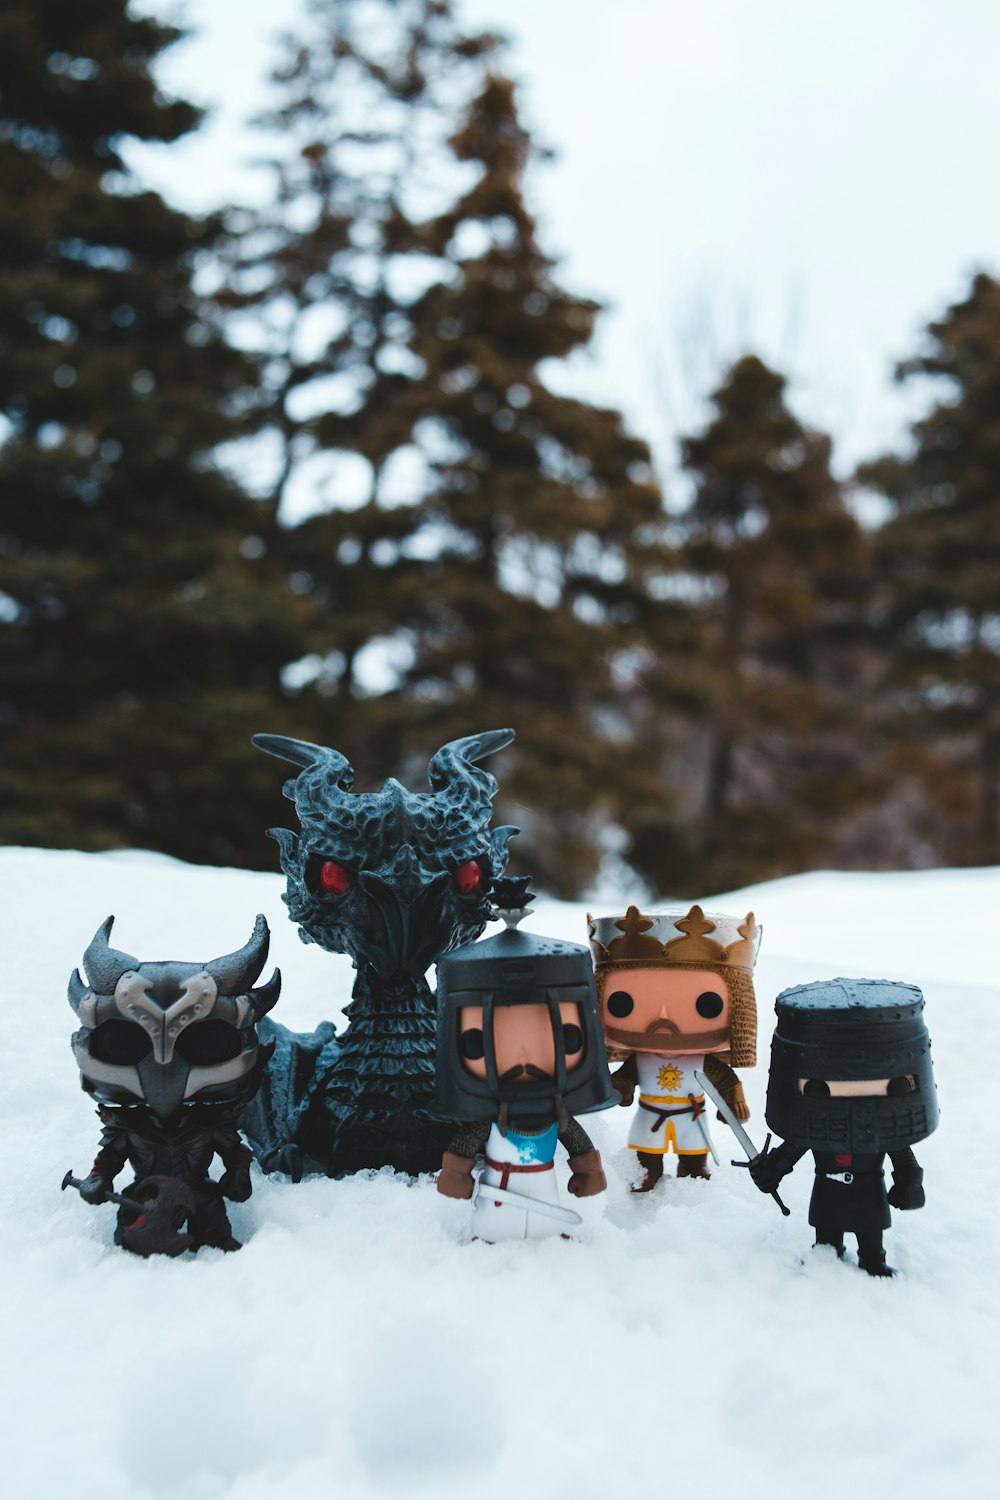 brown and black robot toys on snow covered ground